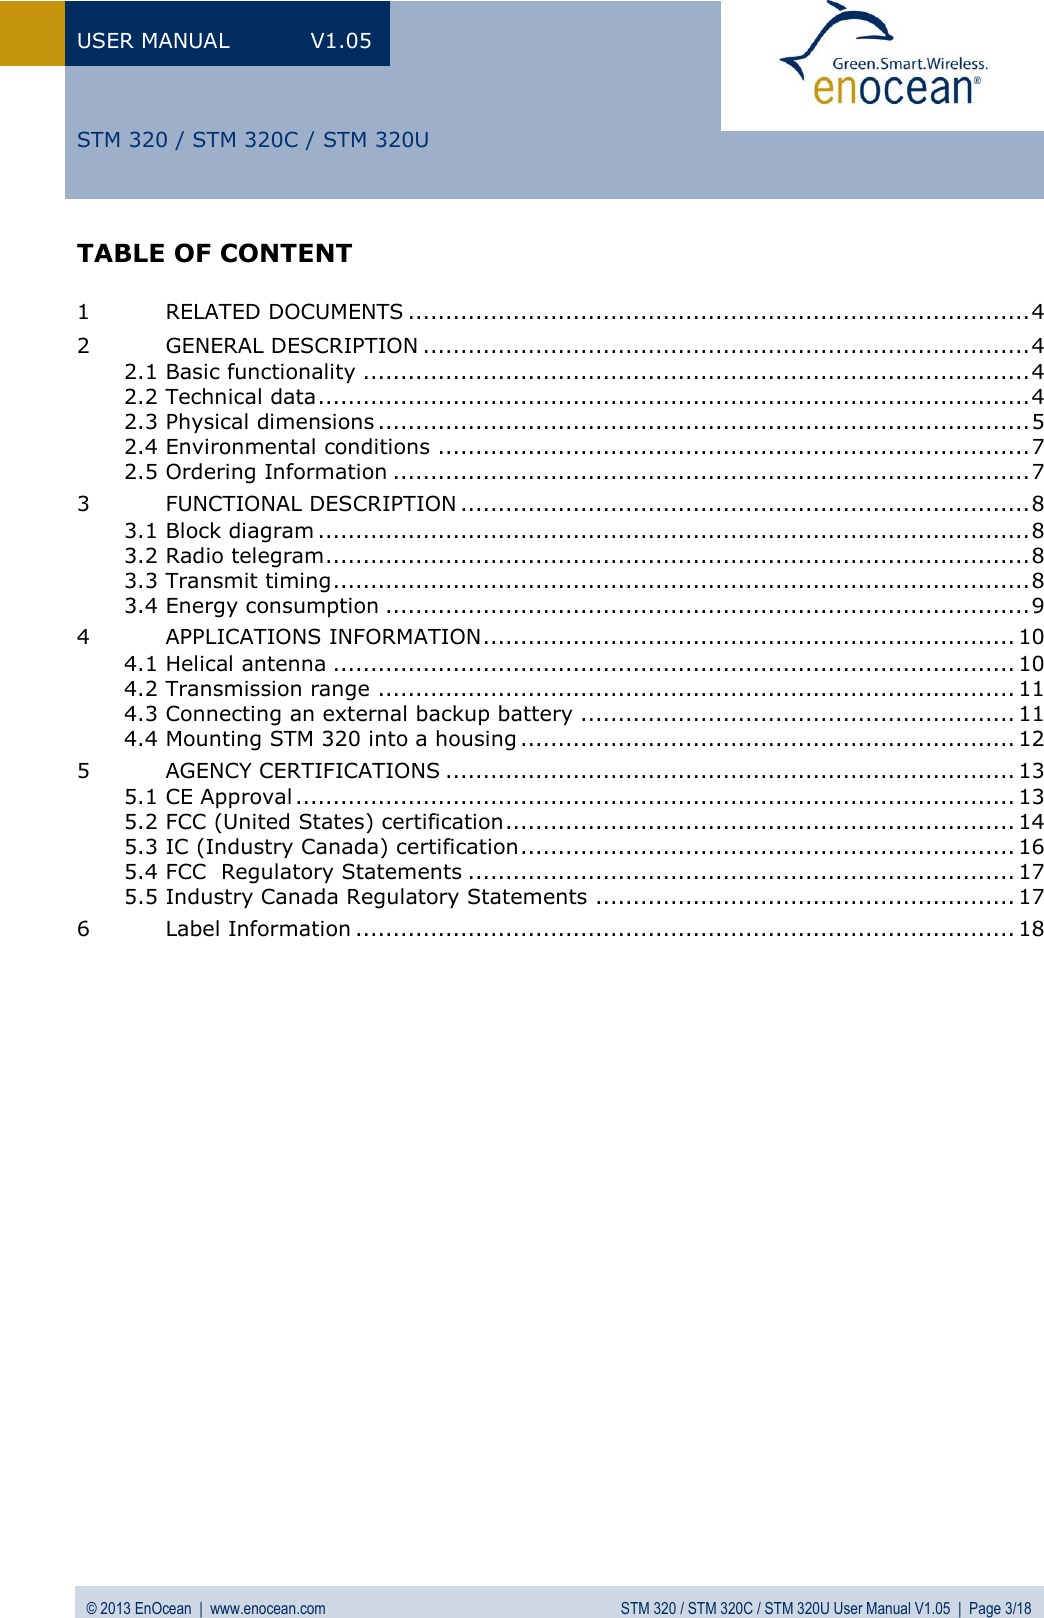 USER MANUAL  V1.05 © 2013 EnOcean  |  www.enocean.com  STM 320 / STM 320C / STM 320U User Manual V1.05  |  Page 3/18   STM 320 / STM 320C / STM 320U TABLE OF CONTENT  1 RELATED DOCUMENTS ................................................................................... 4 2 GENERAL DESCRIPTION ................................................................................. 4 2.1 Basic functionality ......................................................................................... 4 2.2 Technical data ............................................................................................... 4 2.3 Physical dimensions ....................................................................................... 5 2.4 Environmental conditions ............................................................................... 7 2.5 Ordering Information ..................................................................................... 7 3 FUNCTIONAL DESCRIPTION ............................................................................ 8 3.1 Block diagram ............................................................................................... 8 3.2 Radio telegram .............................................................................................. 8 3.3 Transmit timing ............................................................................................. 8 3.4 Energy consumption ...................................................................................... 9 4 APPLICATIONS INFORMATION ....................................................................... 10 4.1 Helical antenna ........................................................................................... 10 4.2 Transmission range ..................................................................................... 11 4.3 Connecting an external backup battery .......................................................... 11 4.4 Mounting STM 320 into a housing .................................................................. 12 5 AGENCY CERTIFICATIONS ............................................................................ 13 5.1 CE Approval ................................................................................................ 13 5.2 FCC (United States) certification .................................................................... 14 5.3 IC (Industry Canada) certification .................................................................. 16 5.4 FCC  Regulatory Statements ......................................................................... 17 5.5 Industry Canada Regulatory Statements ........................................................ 17 6 Label Information ........................................................................................ 18     